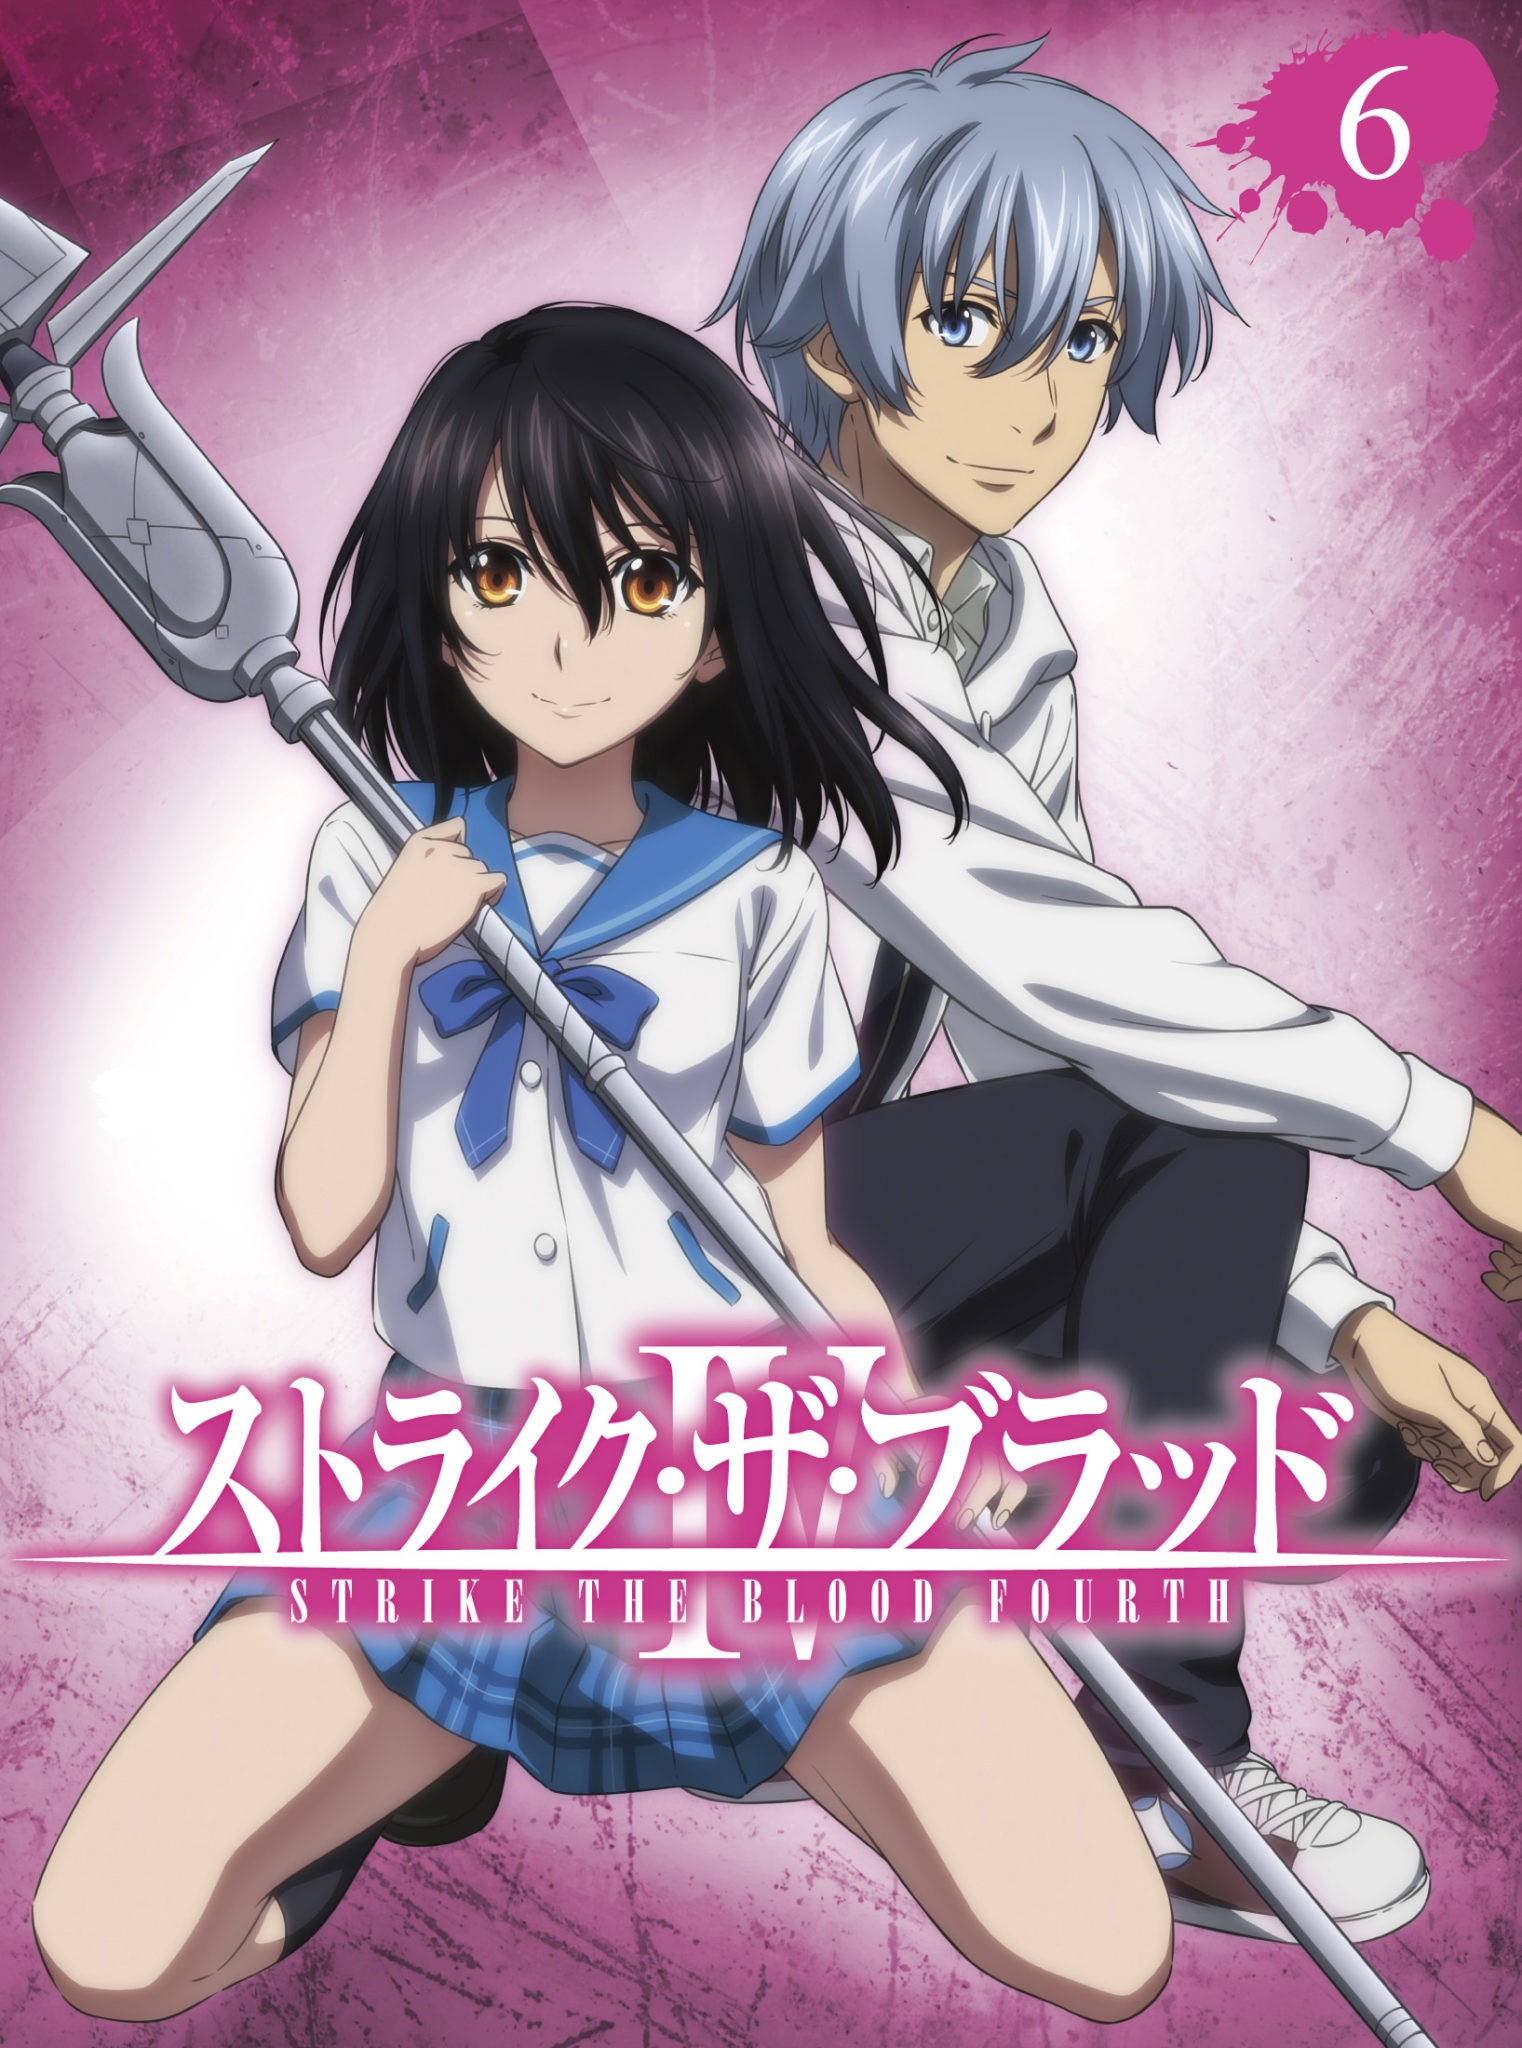 Strike the Blood IV reveals details on its sixth volume 〜 Anime Sweet 💕